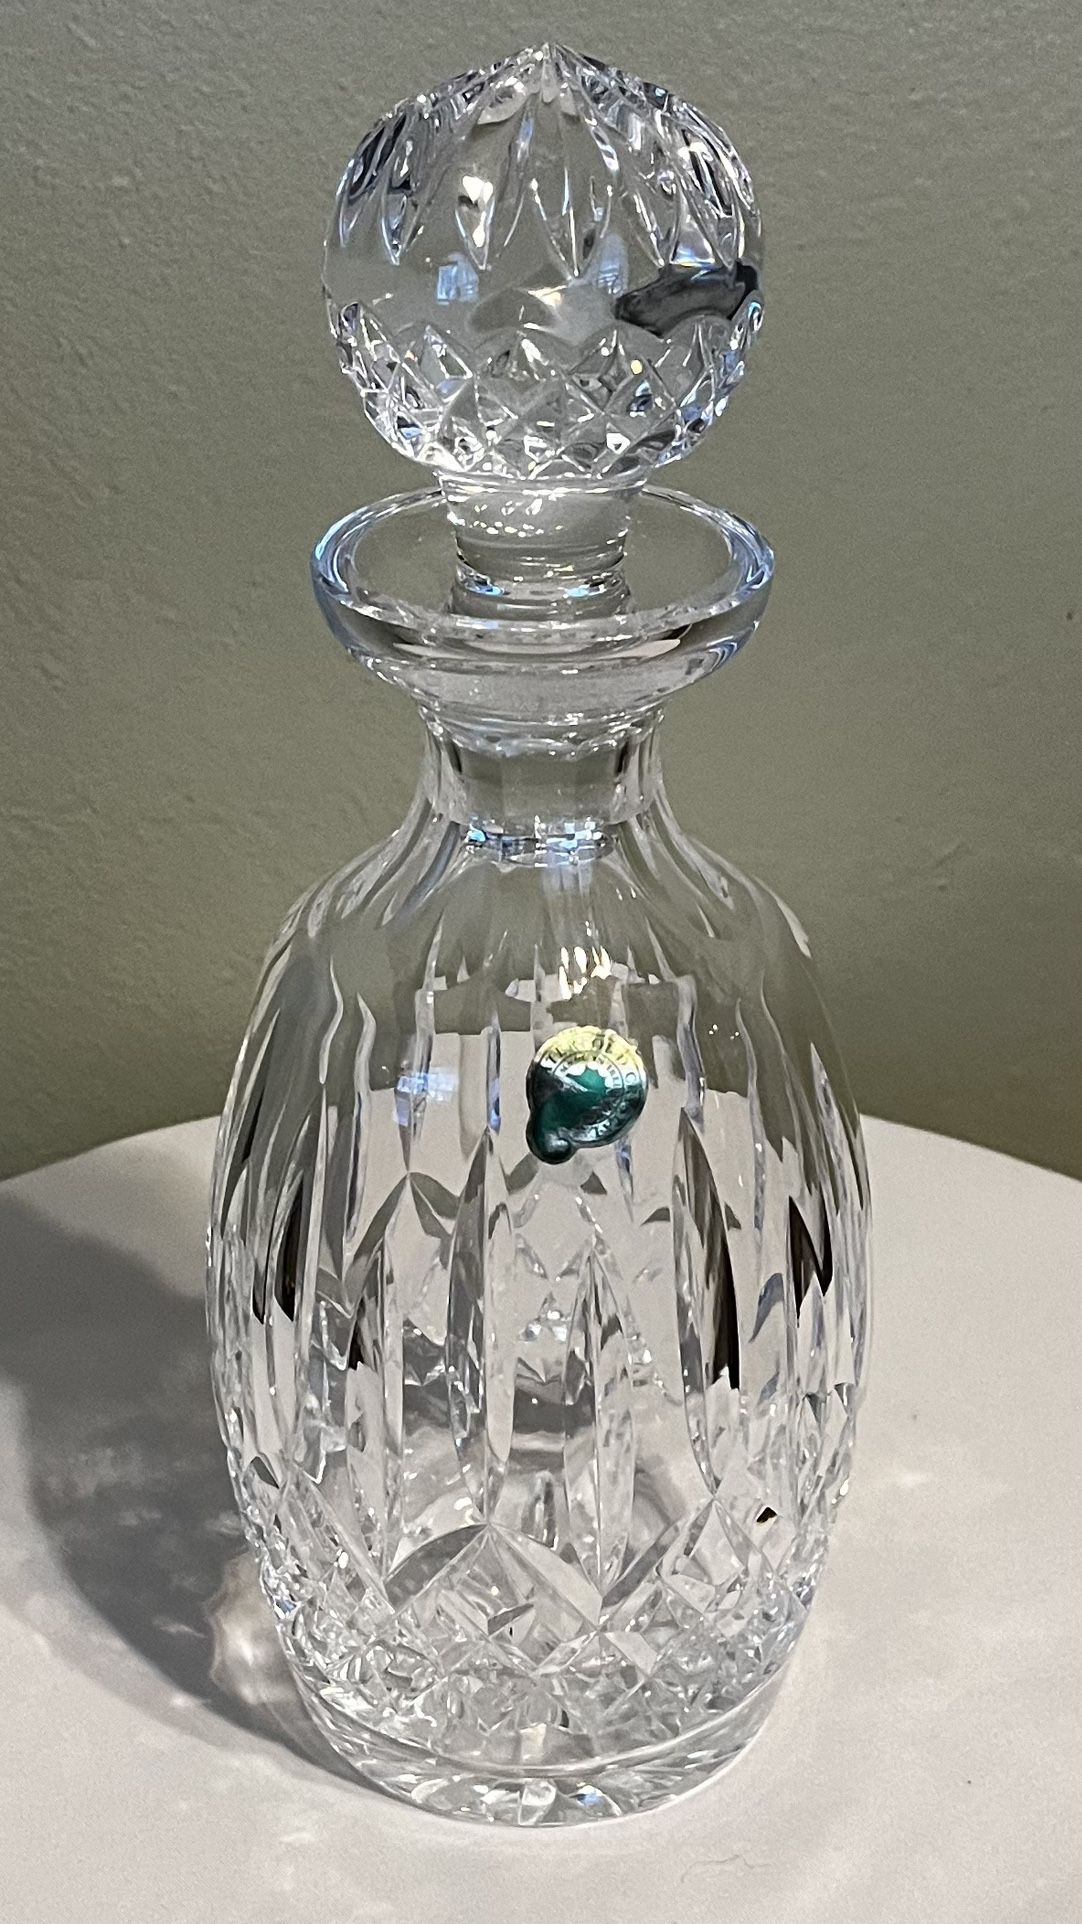 WATERFORD CRYSTAL DECANTER APROX. 10 - 1/2” TALL